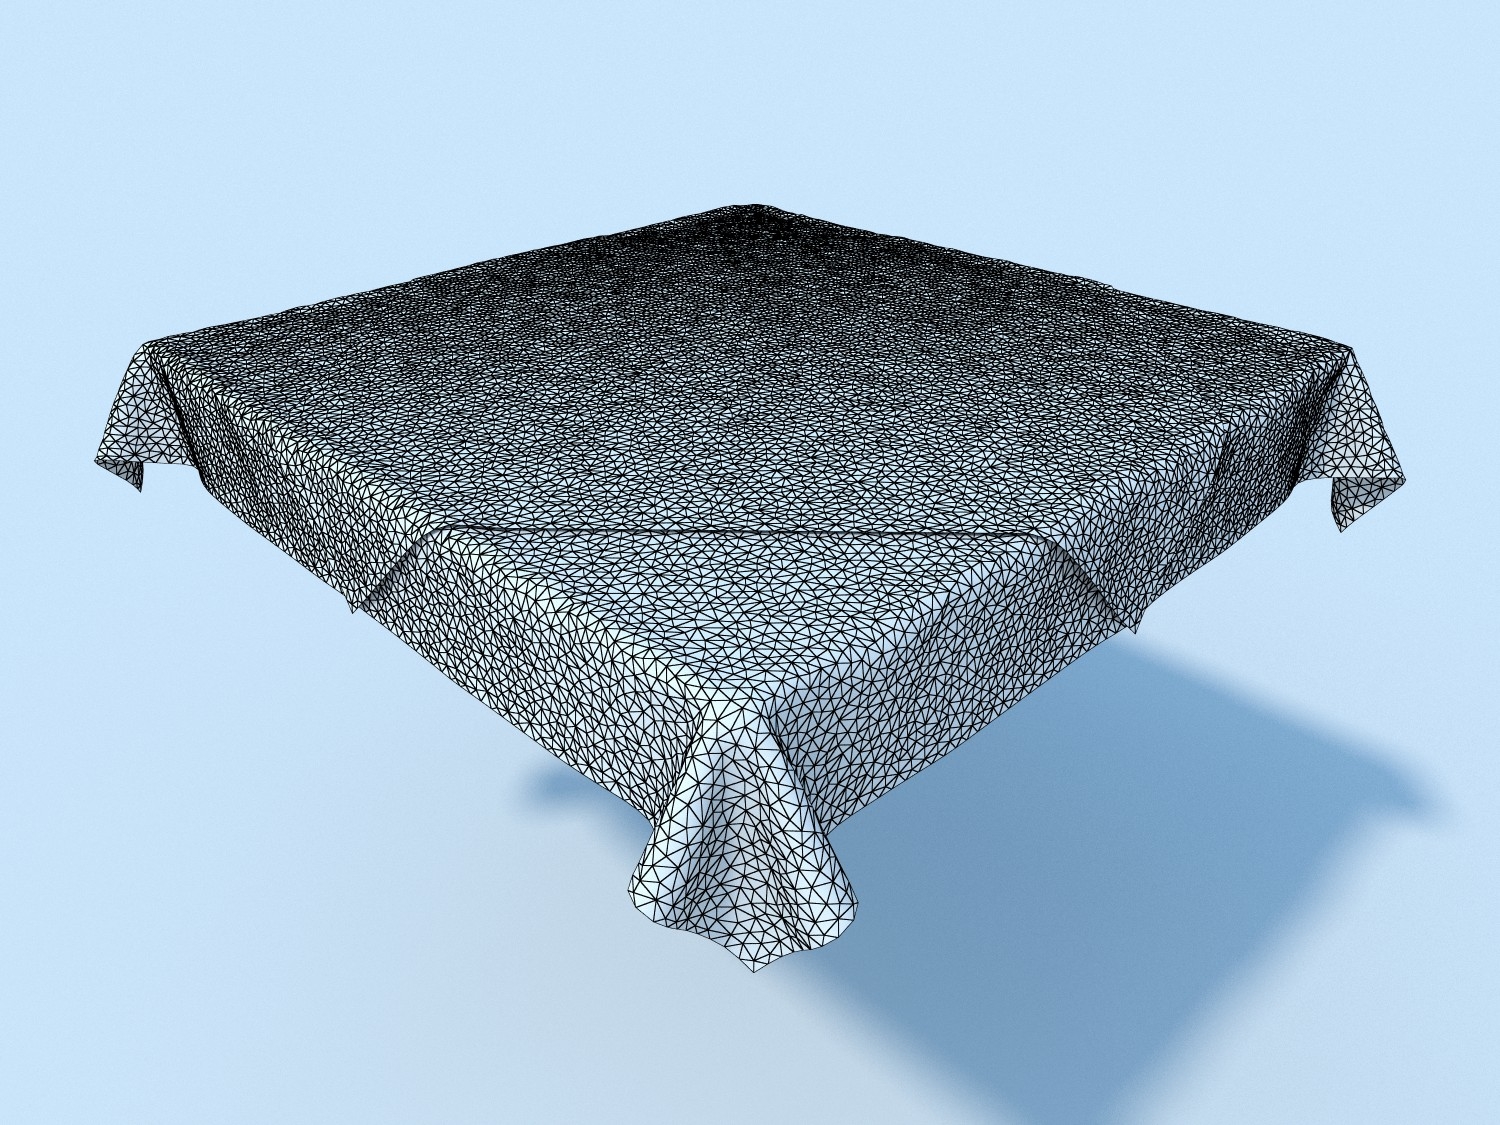 Table cloth zbrush windows 10 pro torrent download with crack full version